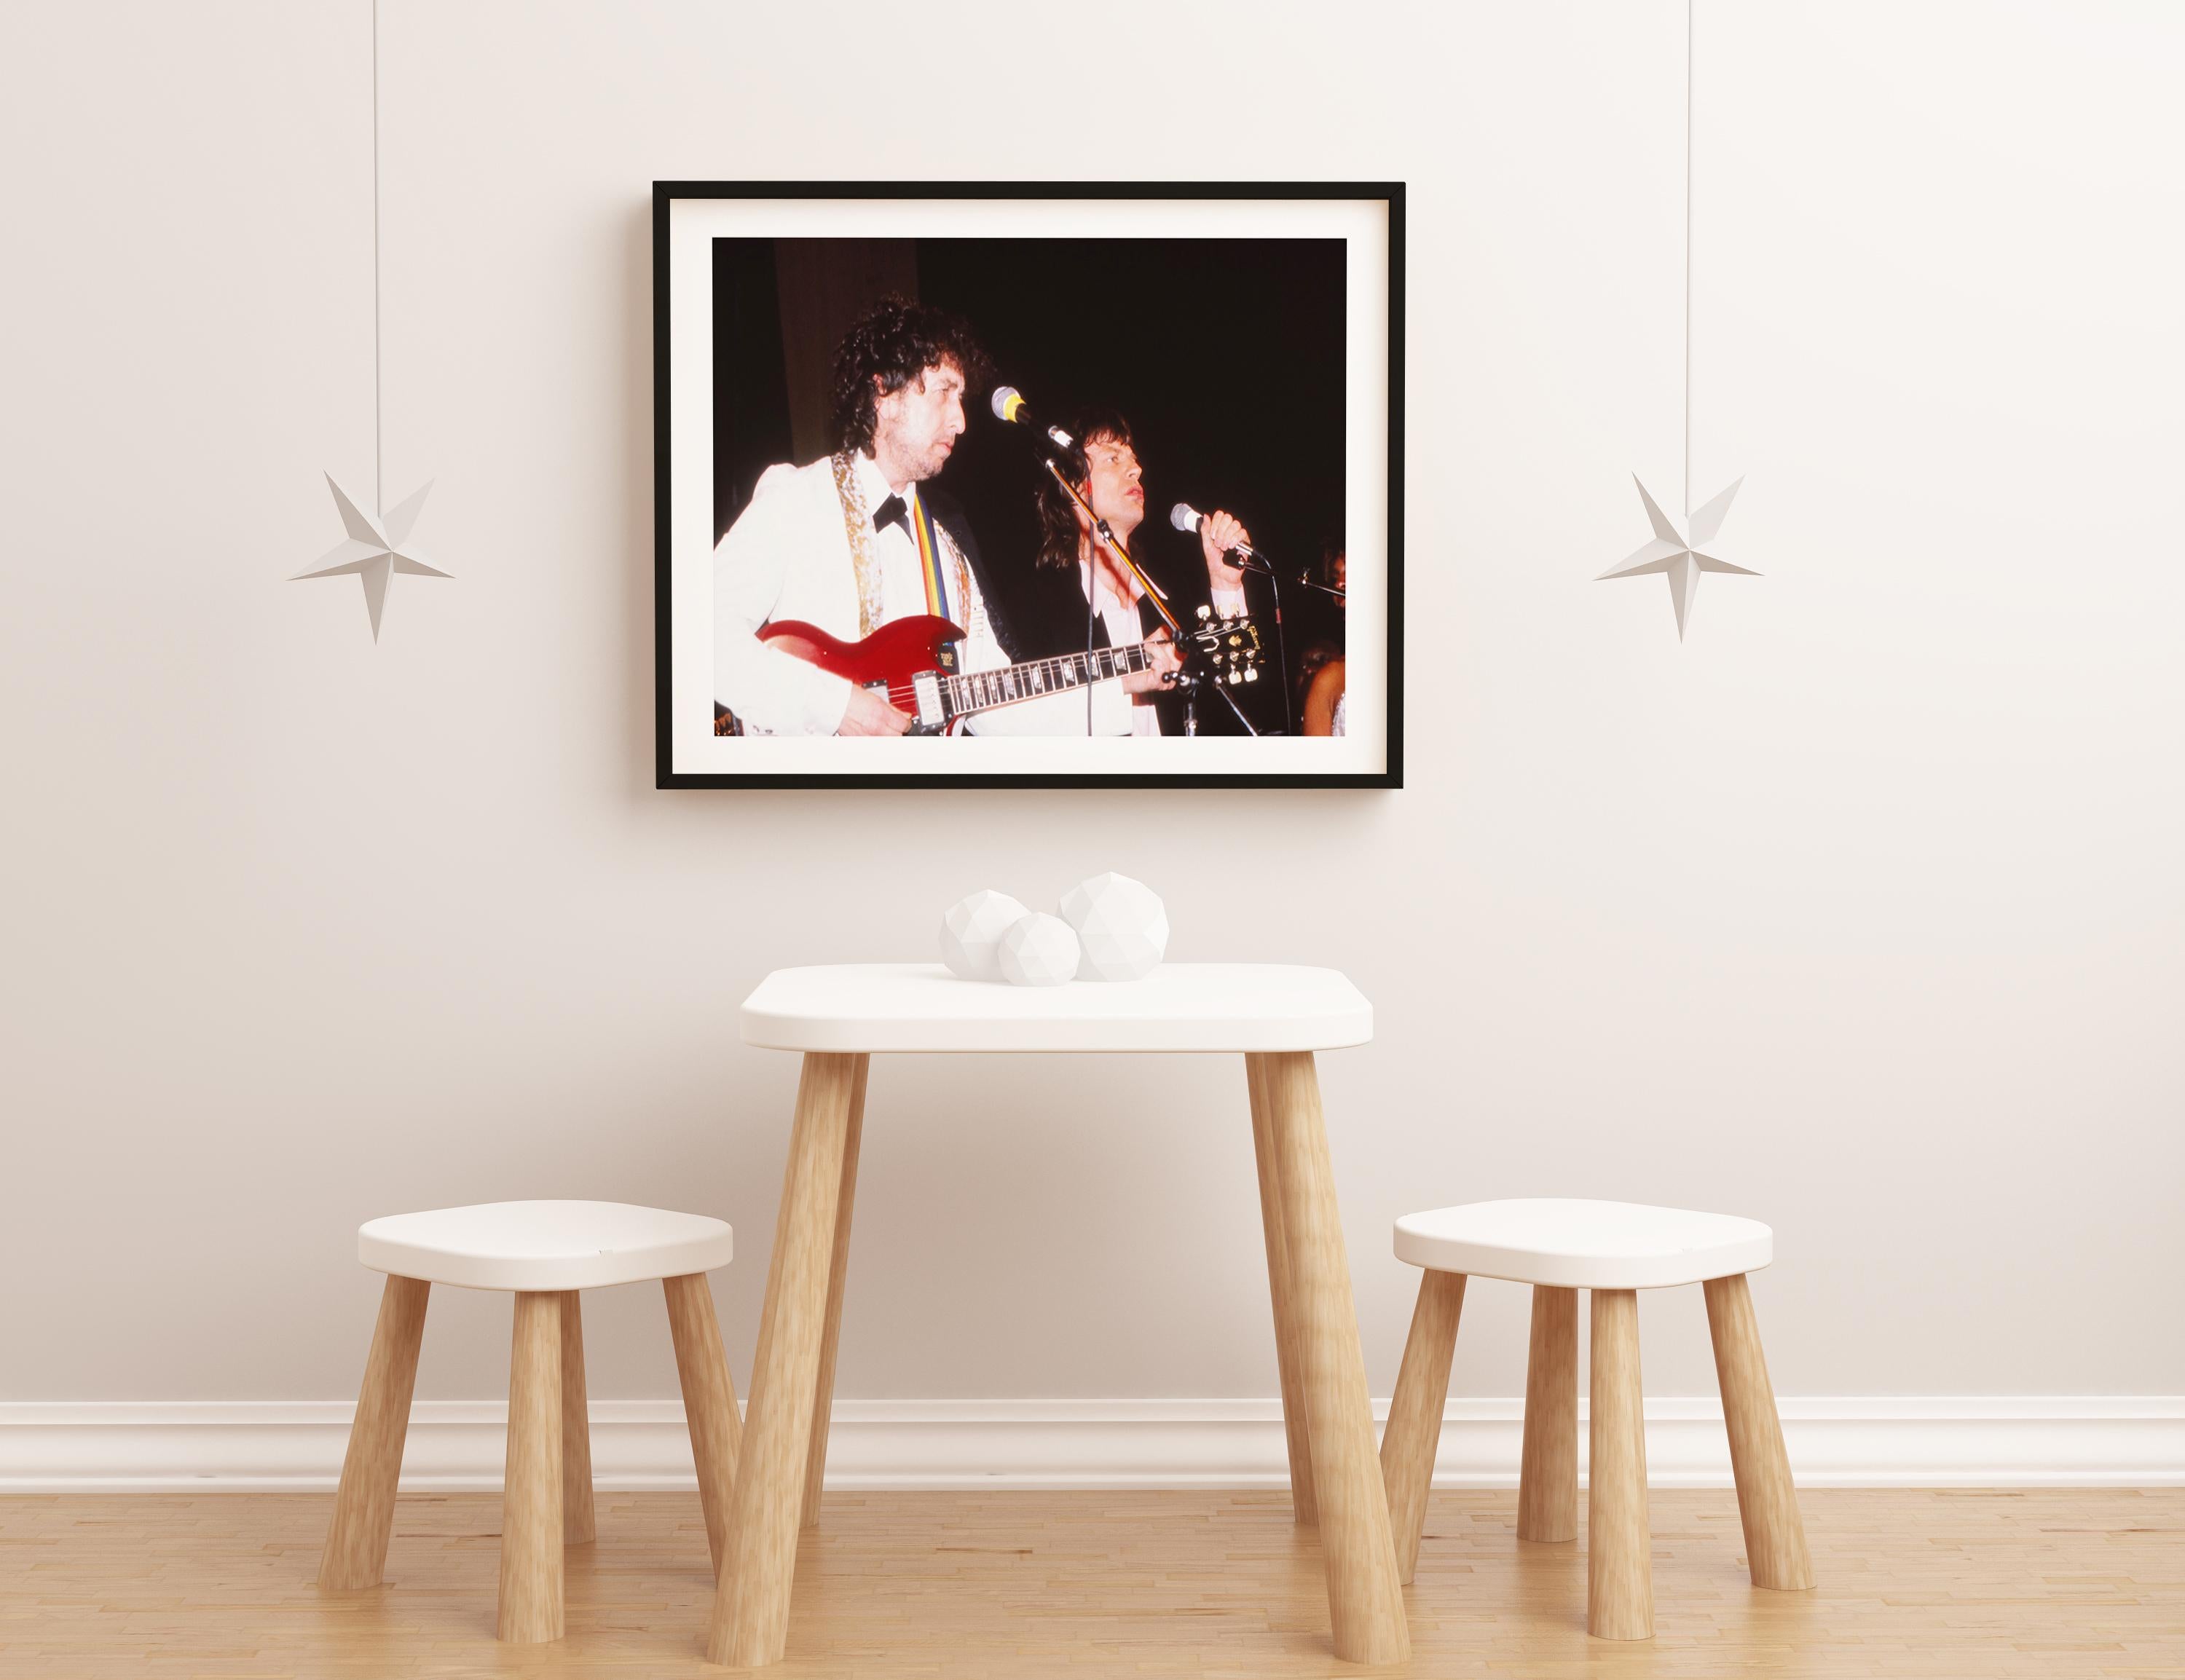 This color action shot features musicians Bob Dylan and Mick Jagger of the Rolling Stones performing together on stage. Bob Dylan is American singer-songwriter, author, and painter who has been an influential figure in popular music and culture for